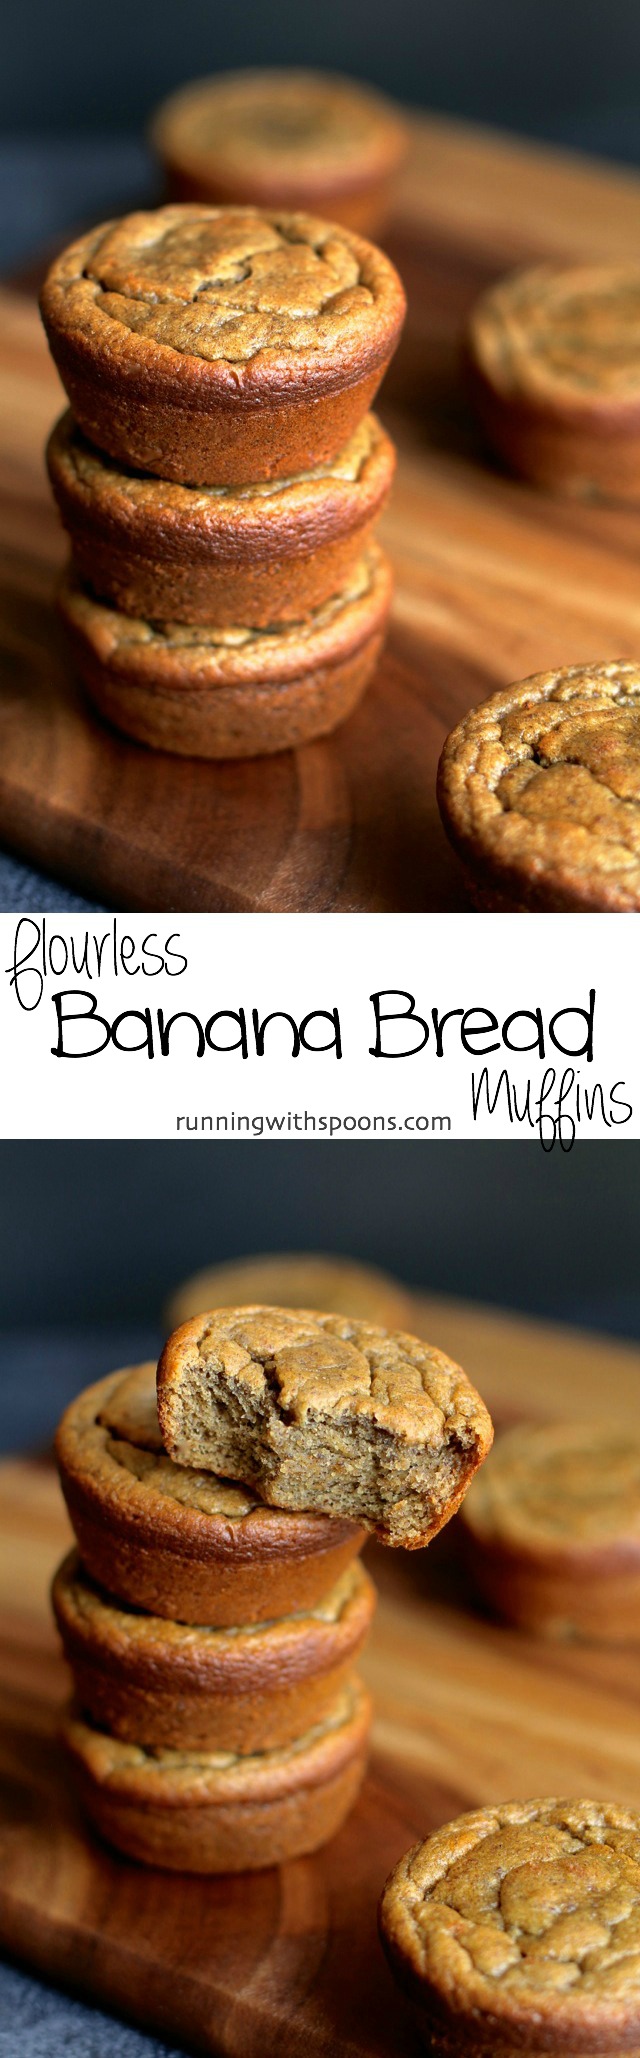 Flourless Banana Bread Muffins -- gluten-free, sugar-free, dairy-free, and oil-free || runningwithspoons.com.